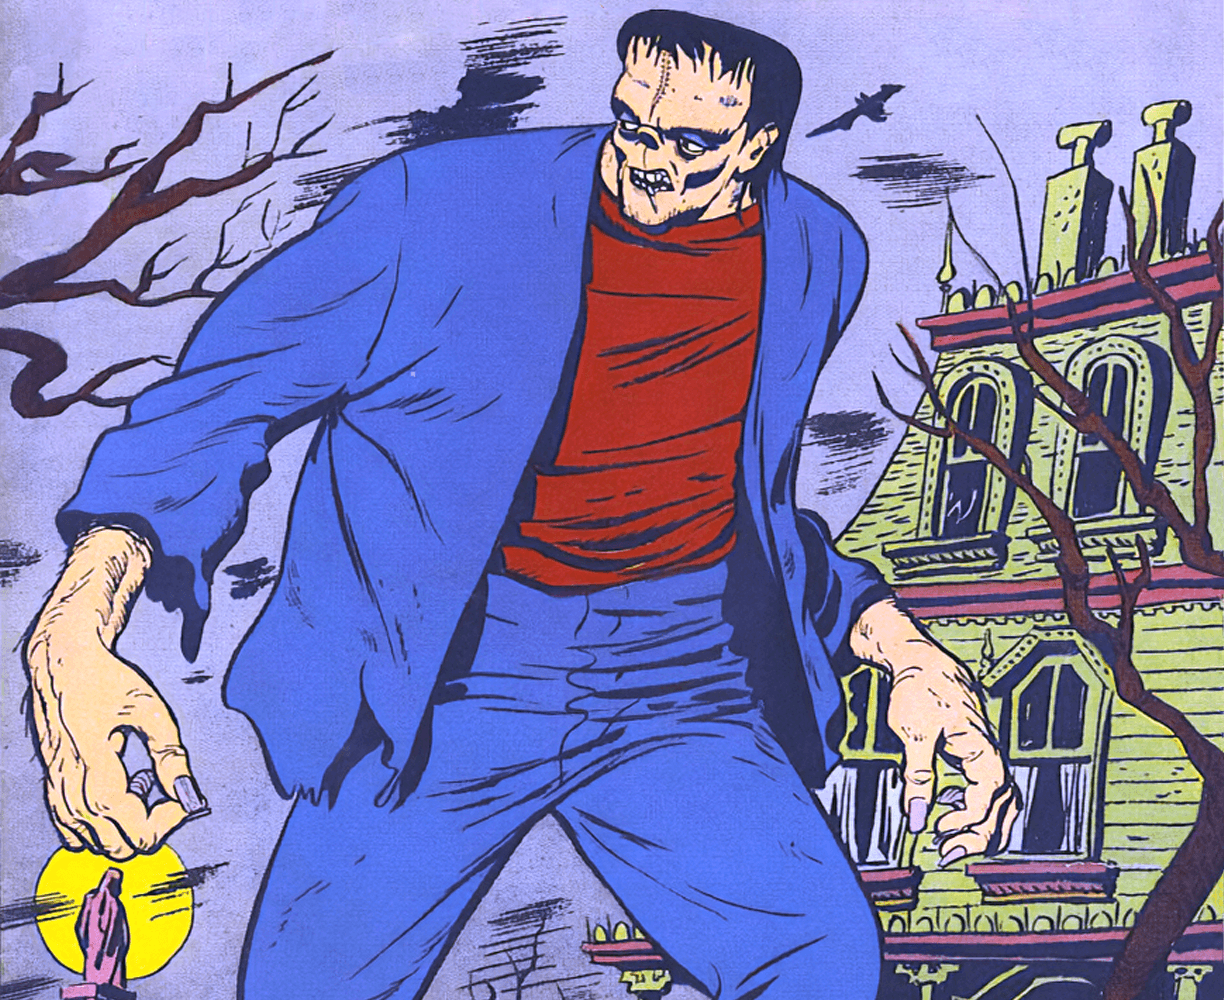 The cover art for the episode The Tomb of the Living Dead 11 from the comics series Frankenstein - The Return, which is number 33 in the series